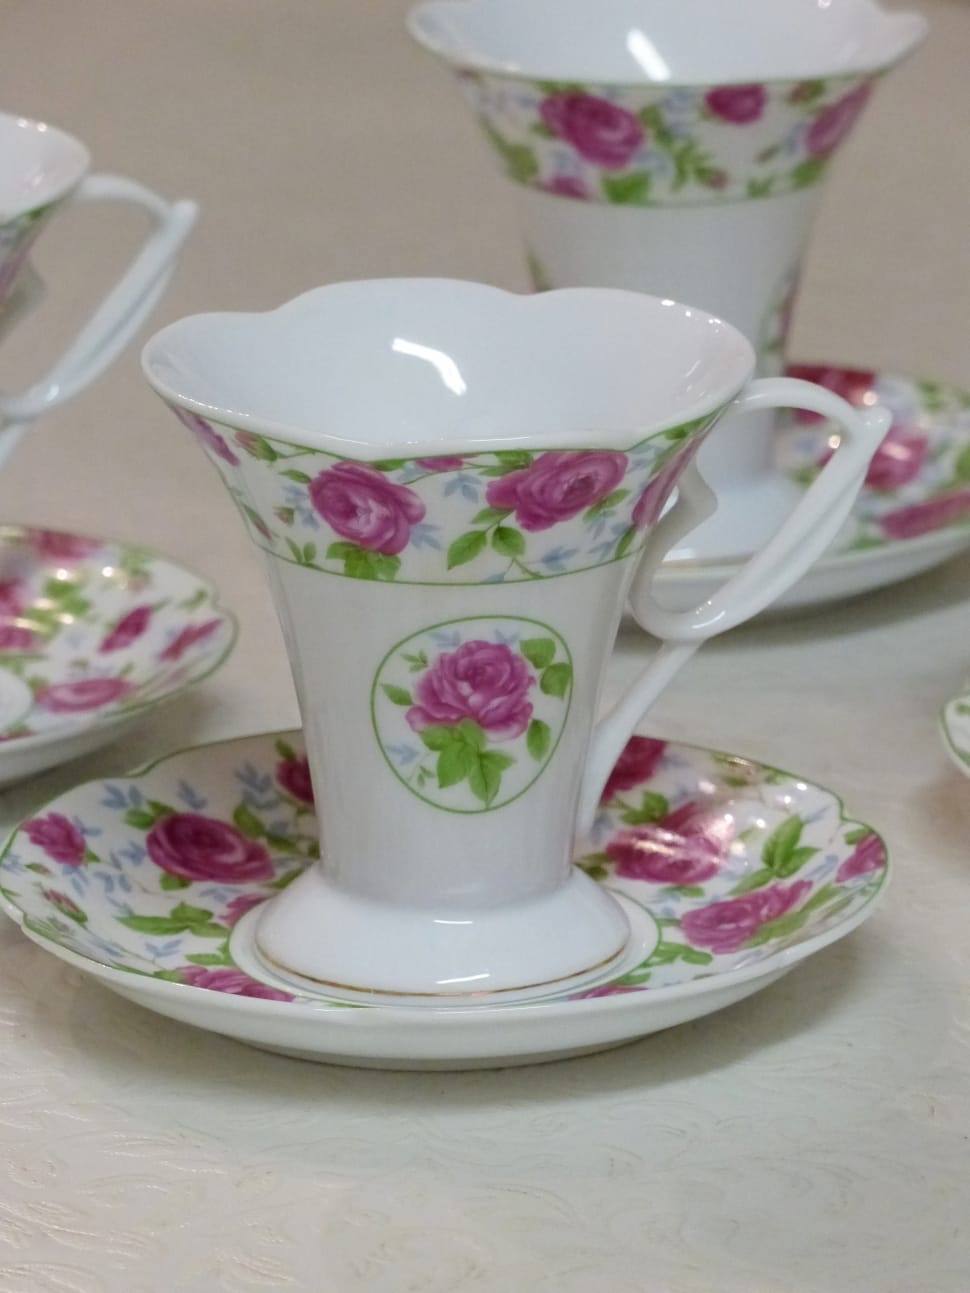 green white and purple scallop ceramic teacup with saucer preview